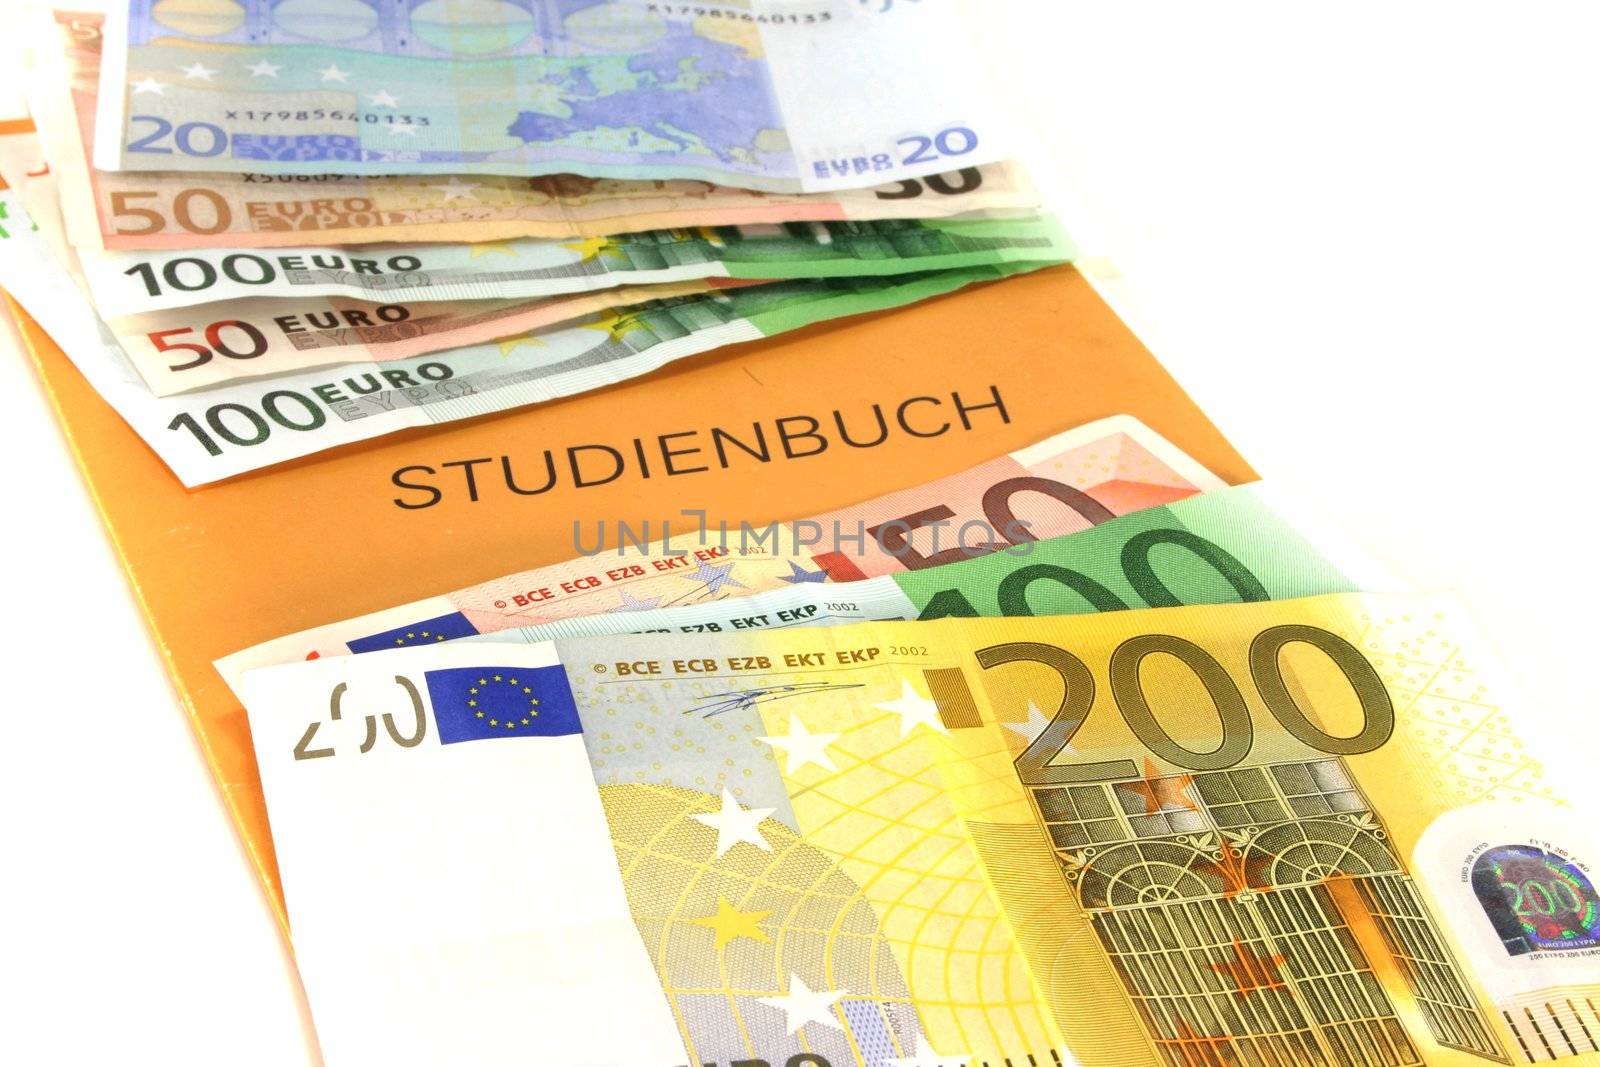 Study book with euro notes by discovery